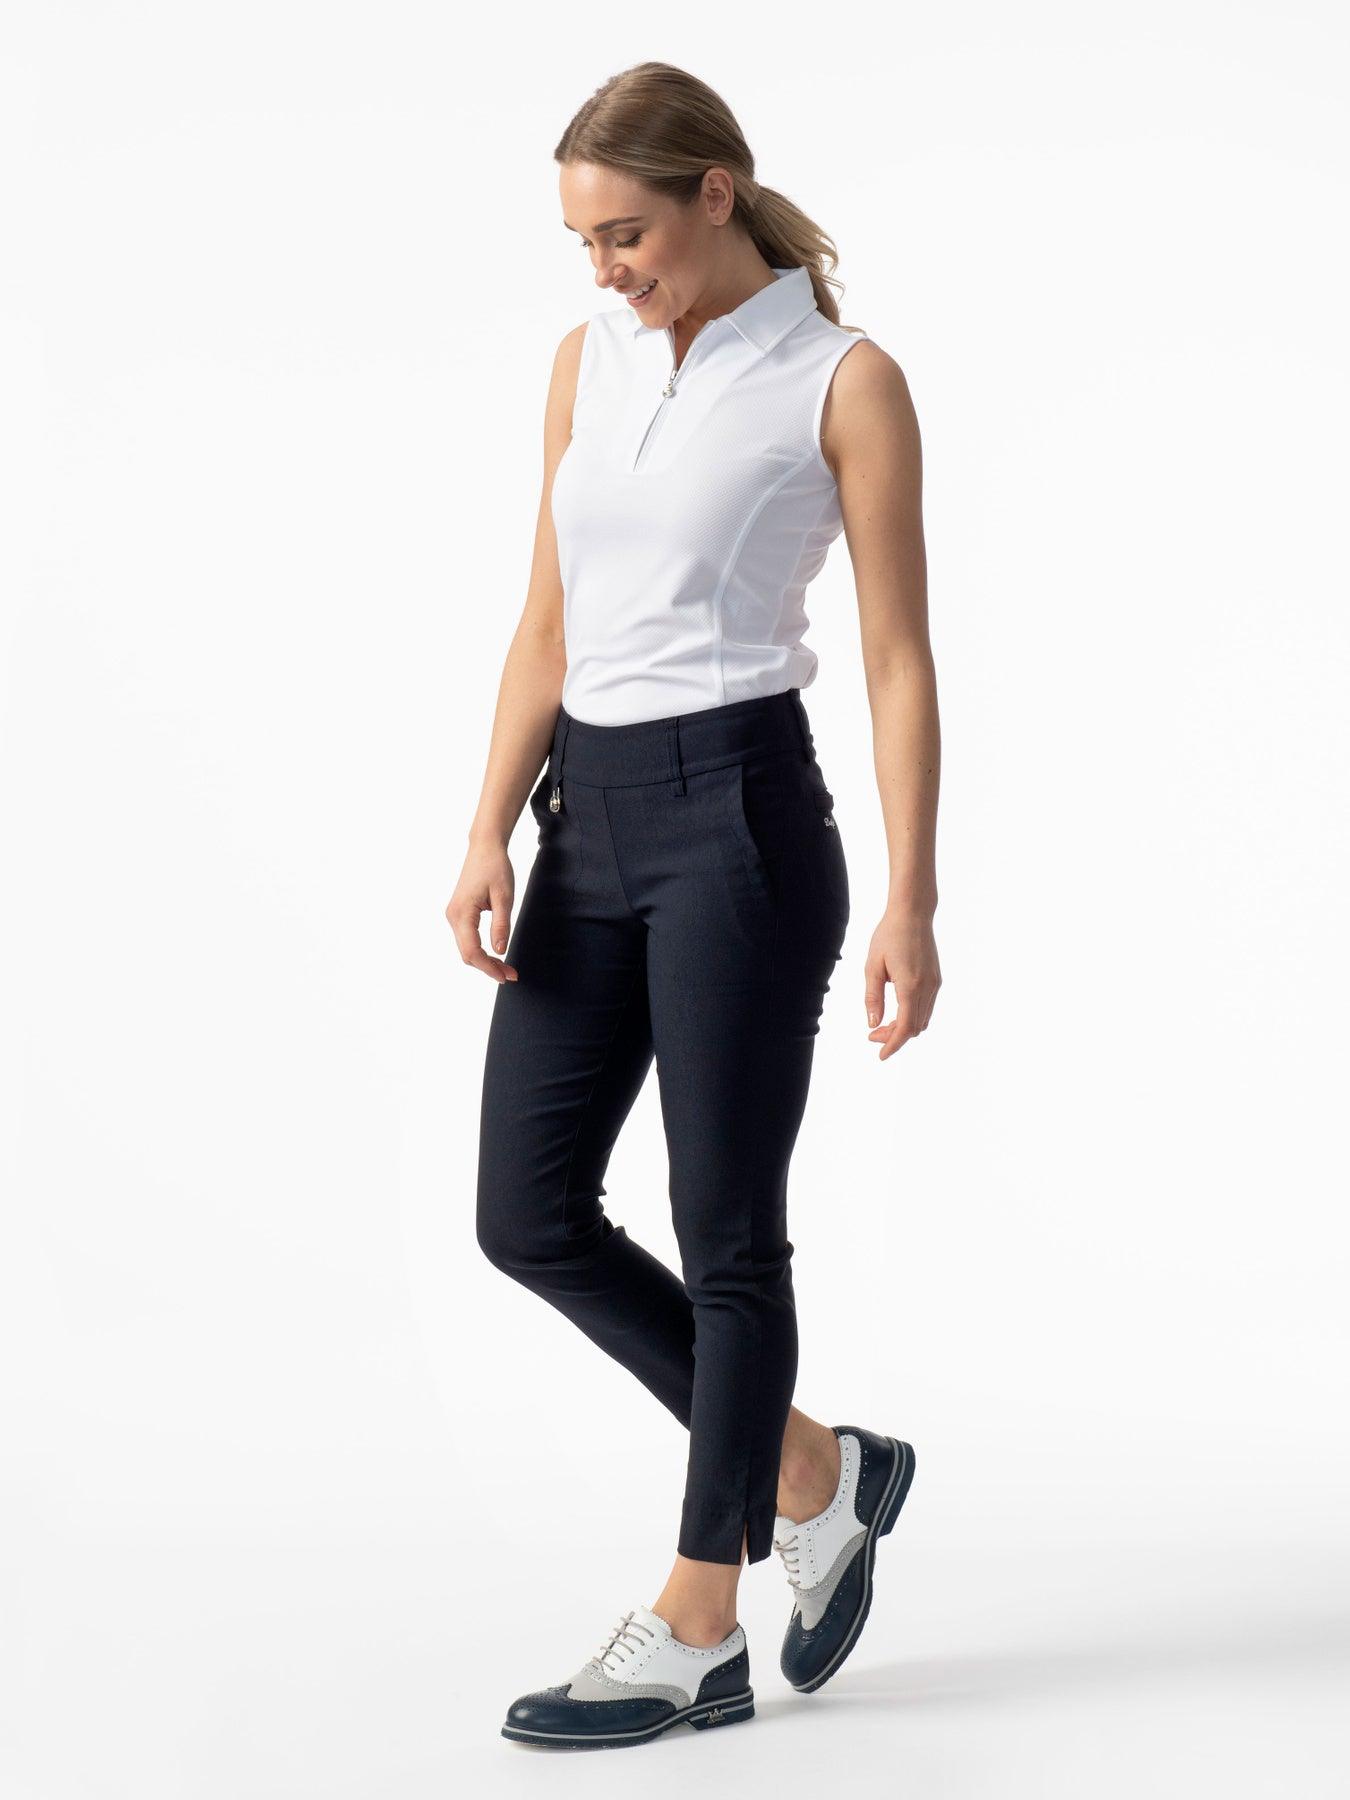 Daily Sports - Lyric High Water Ankle Pants 94cm – LE CAPITAINE D'A BORD